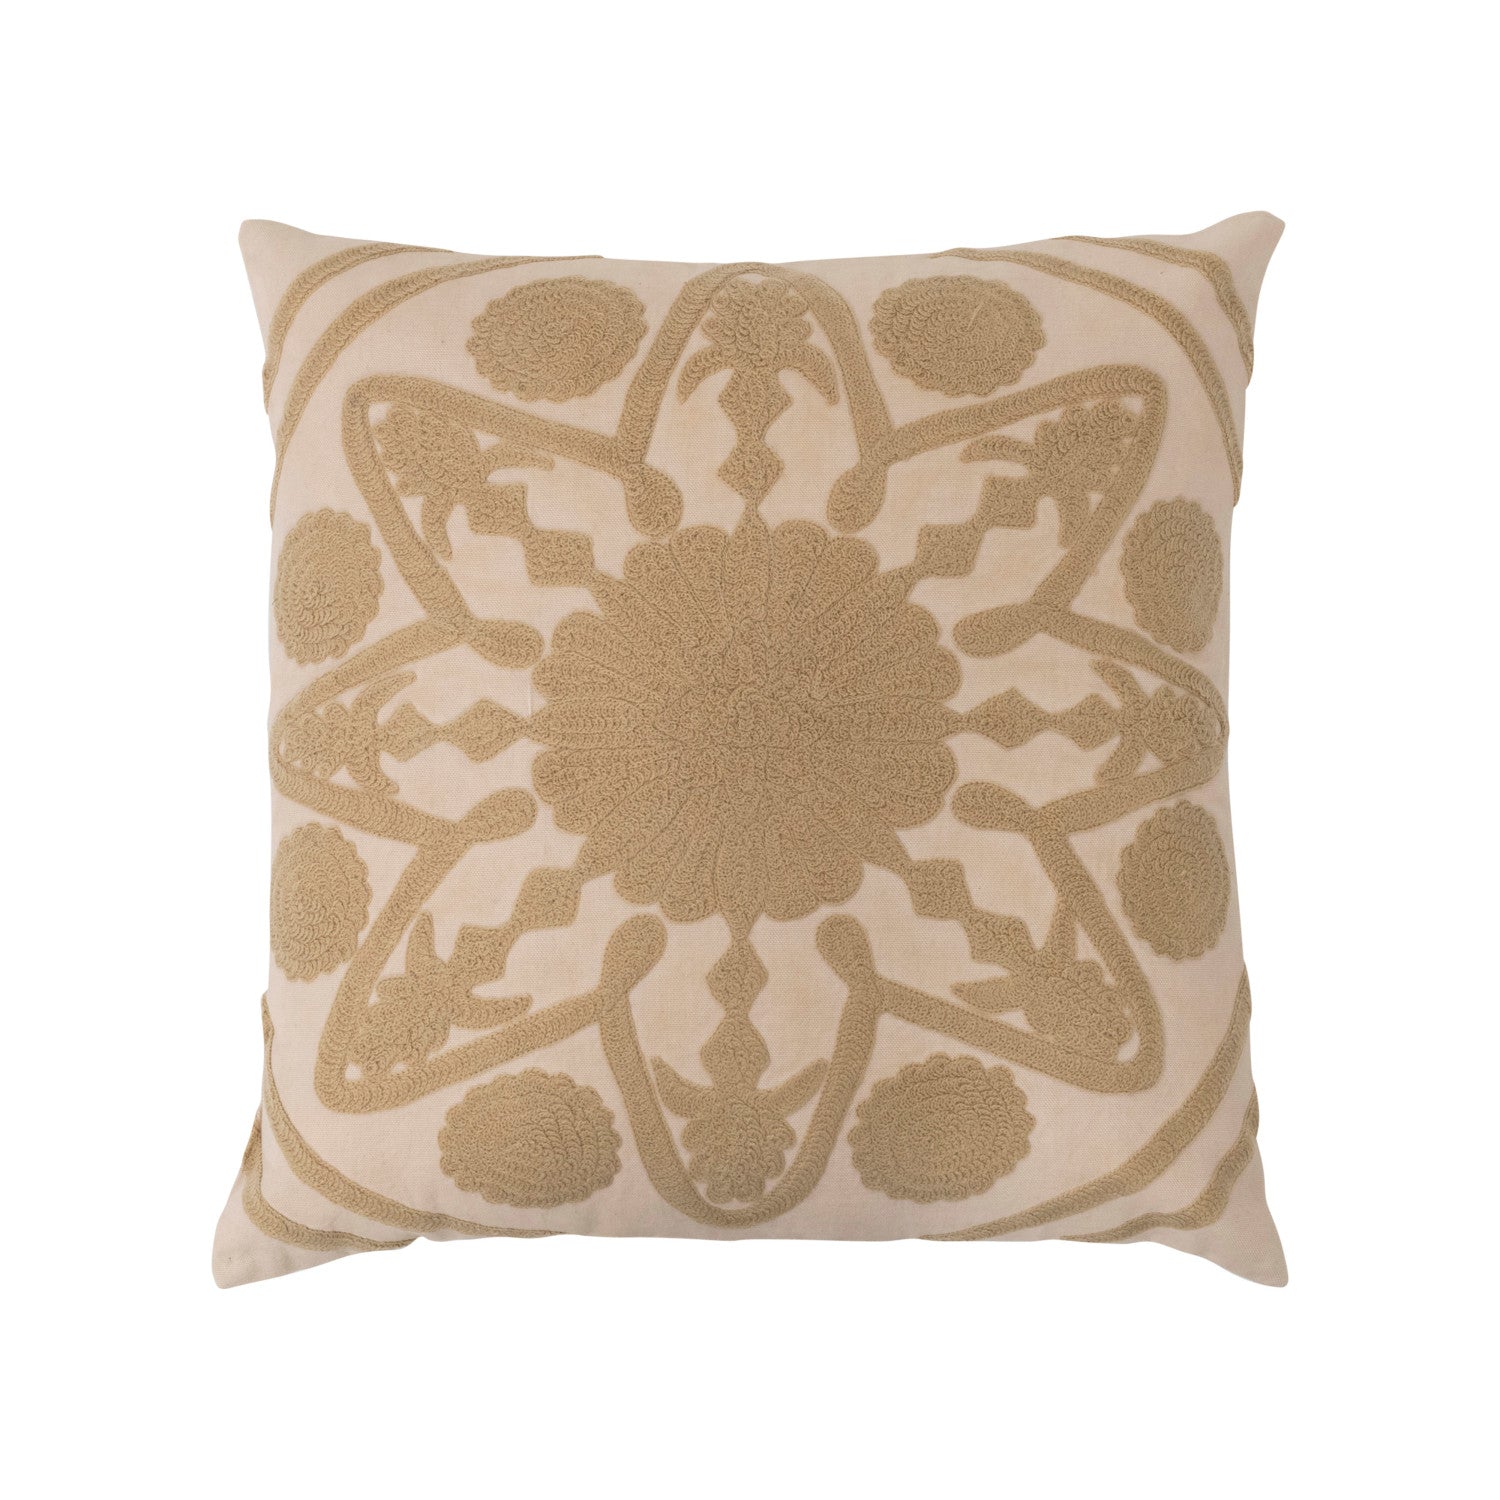 Beige Embroidered Pillow